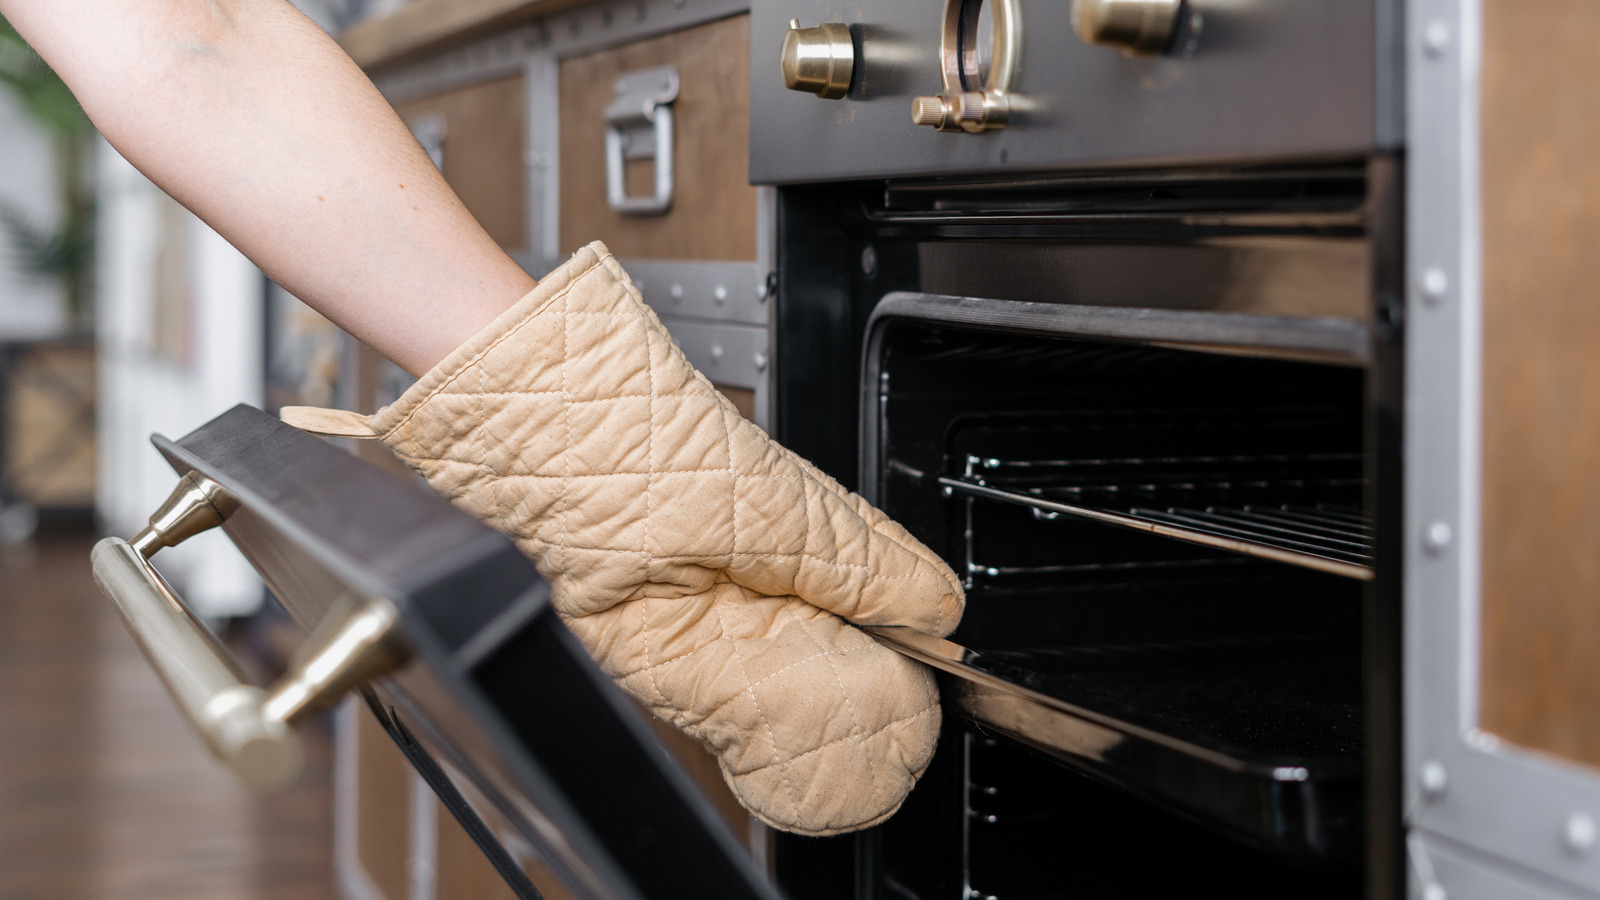 https://www.thedailymeal.com/img/gallery/you-should-never-use-wet-oven-mitts-heres-why/l-intro-1678391580.jpg